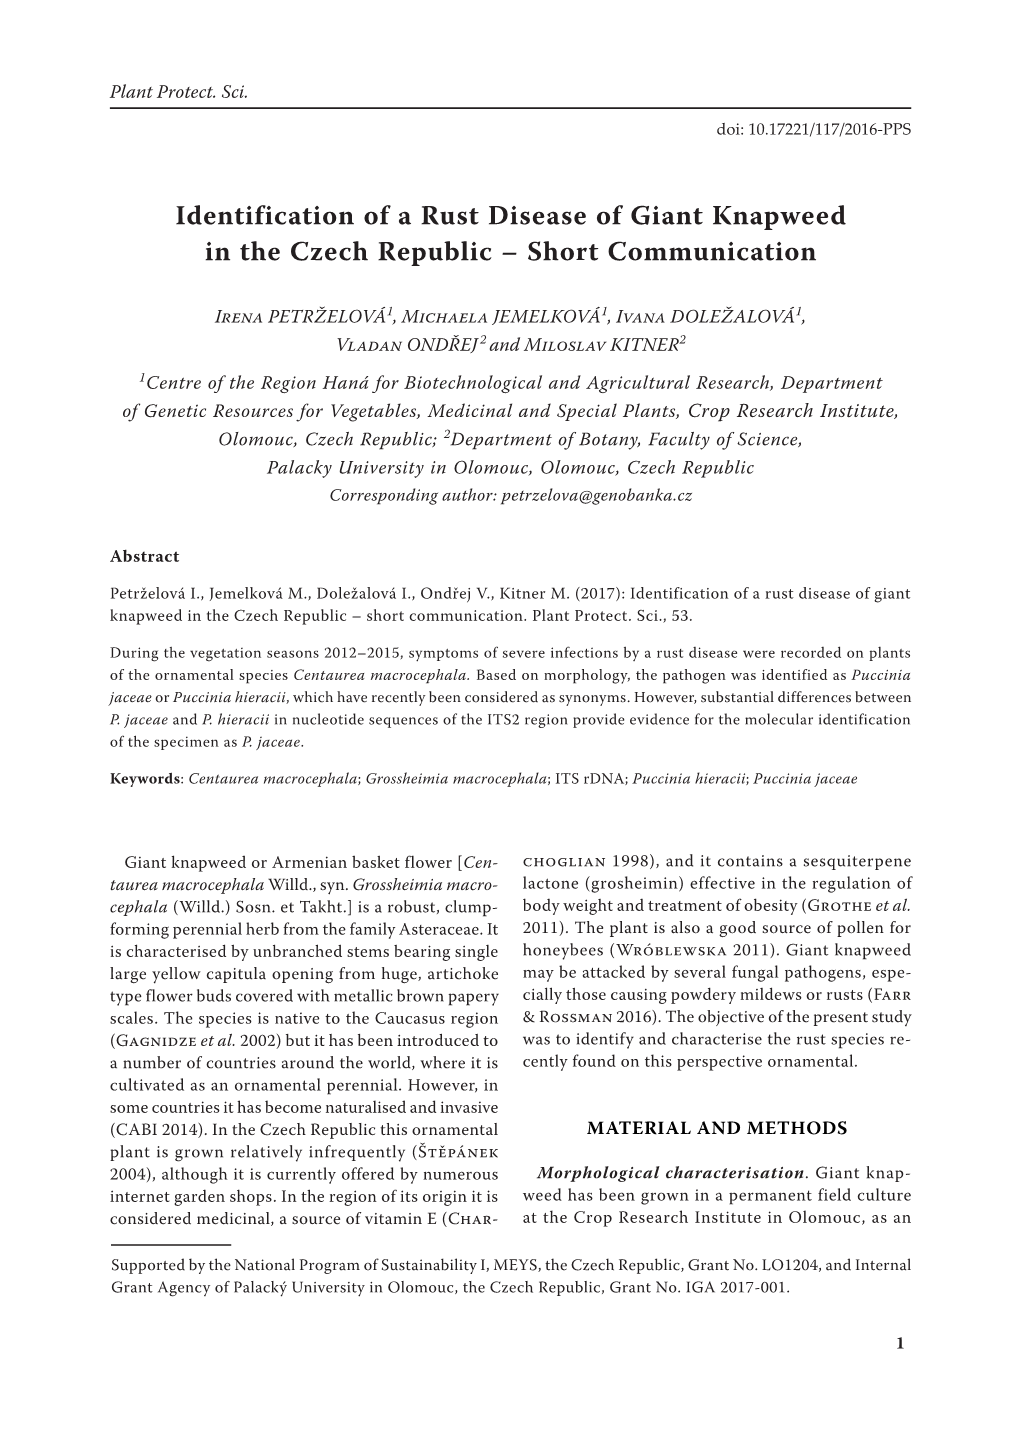 Identification of a Rust Disease of Giant Knapweed in the Czech Republic – Short Communication